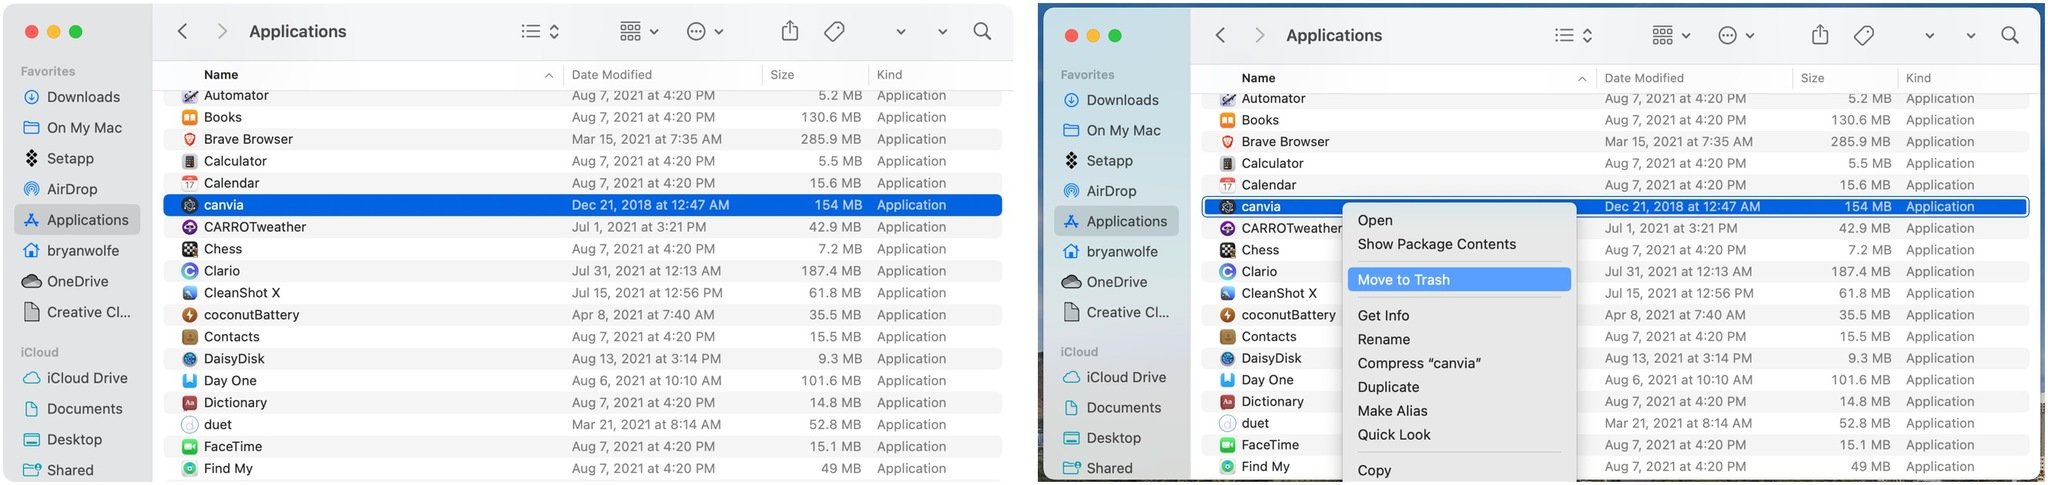 To remove unknown apps, go into the Applications folder and right-click on the app you wish to delete. Choose Move to Trash. Repeat to remove additional apps, then empty the Mac Trash.